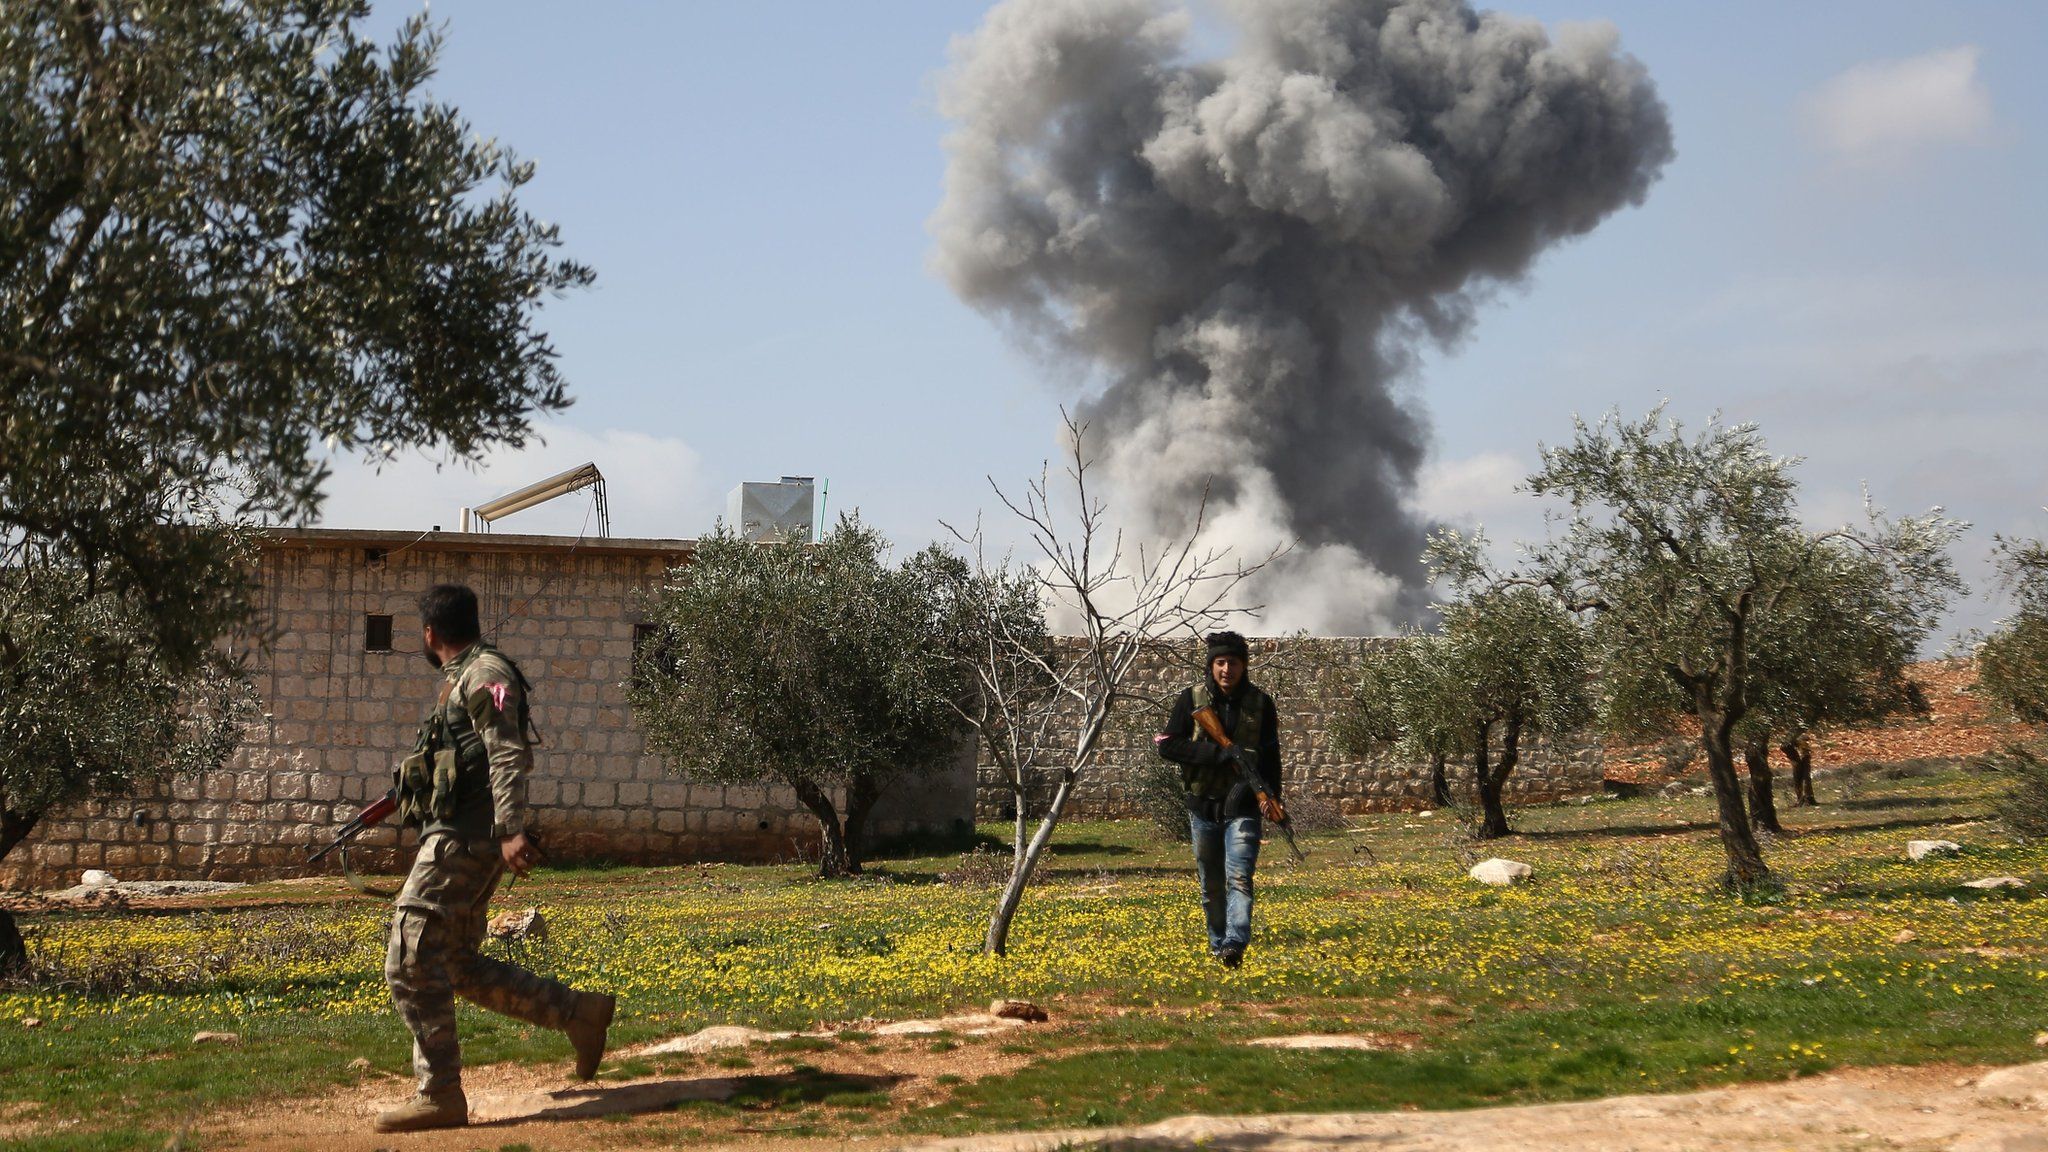 Turkish-backed Syrian opposition fighters are seen in the village of Jamanli, northeast of the Syrian city of Afrin, on March 3, 2018, as smoke billows in the background from a reported Kurdish People's Protection Units (YPG) location.